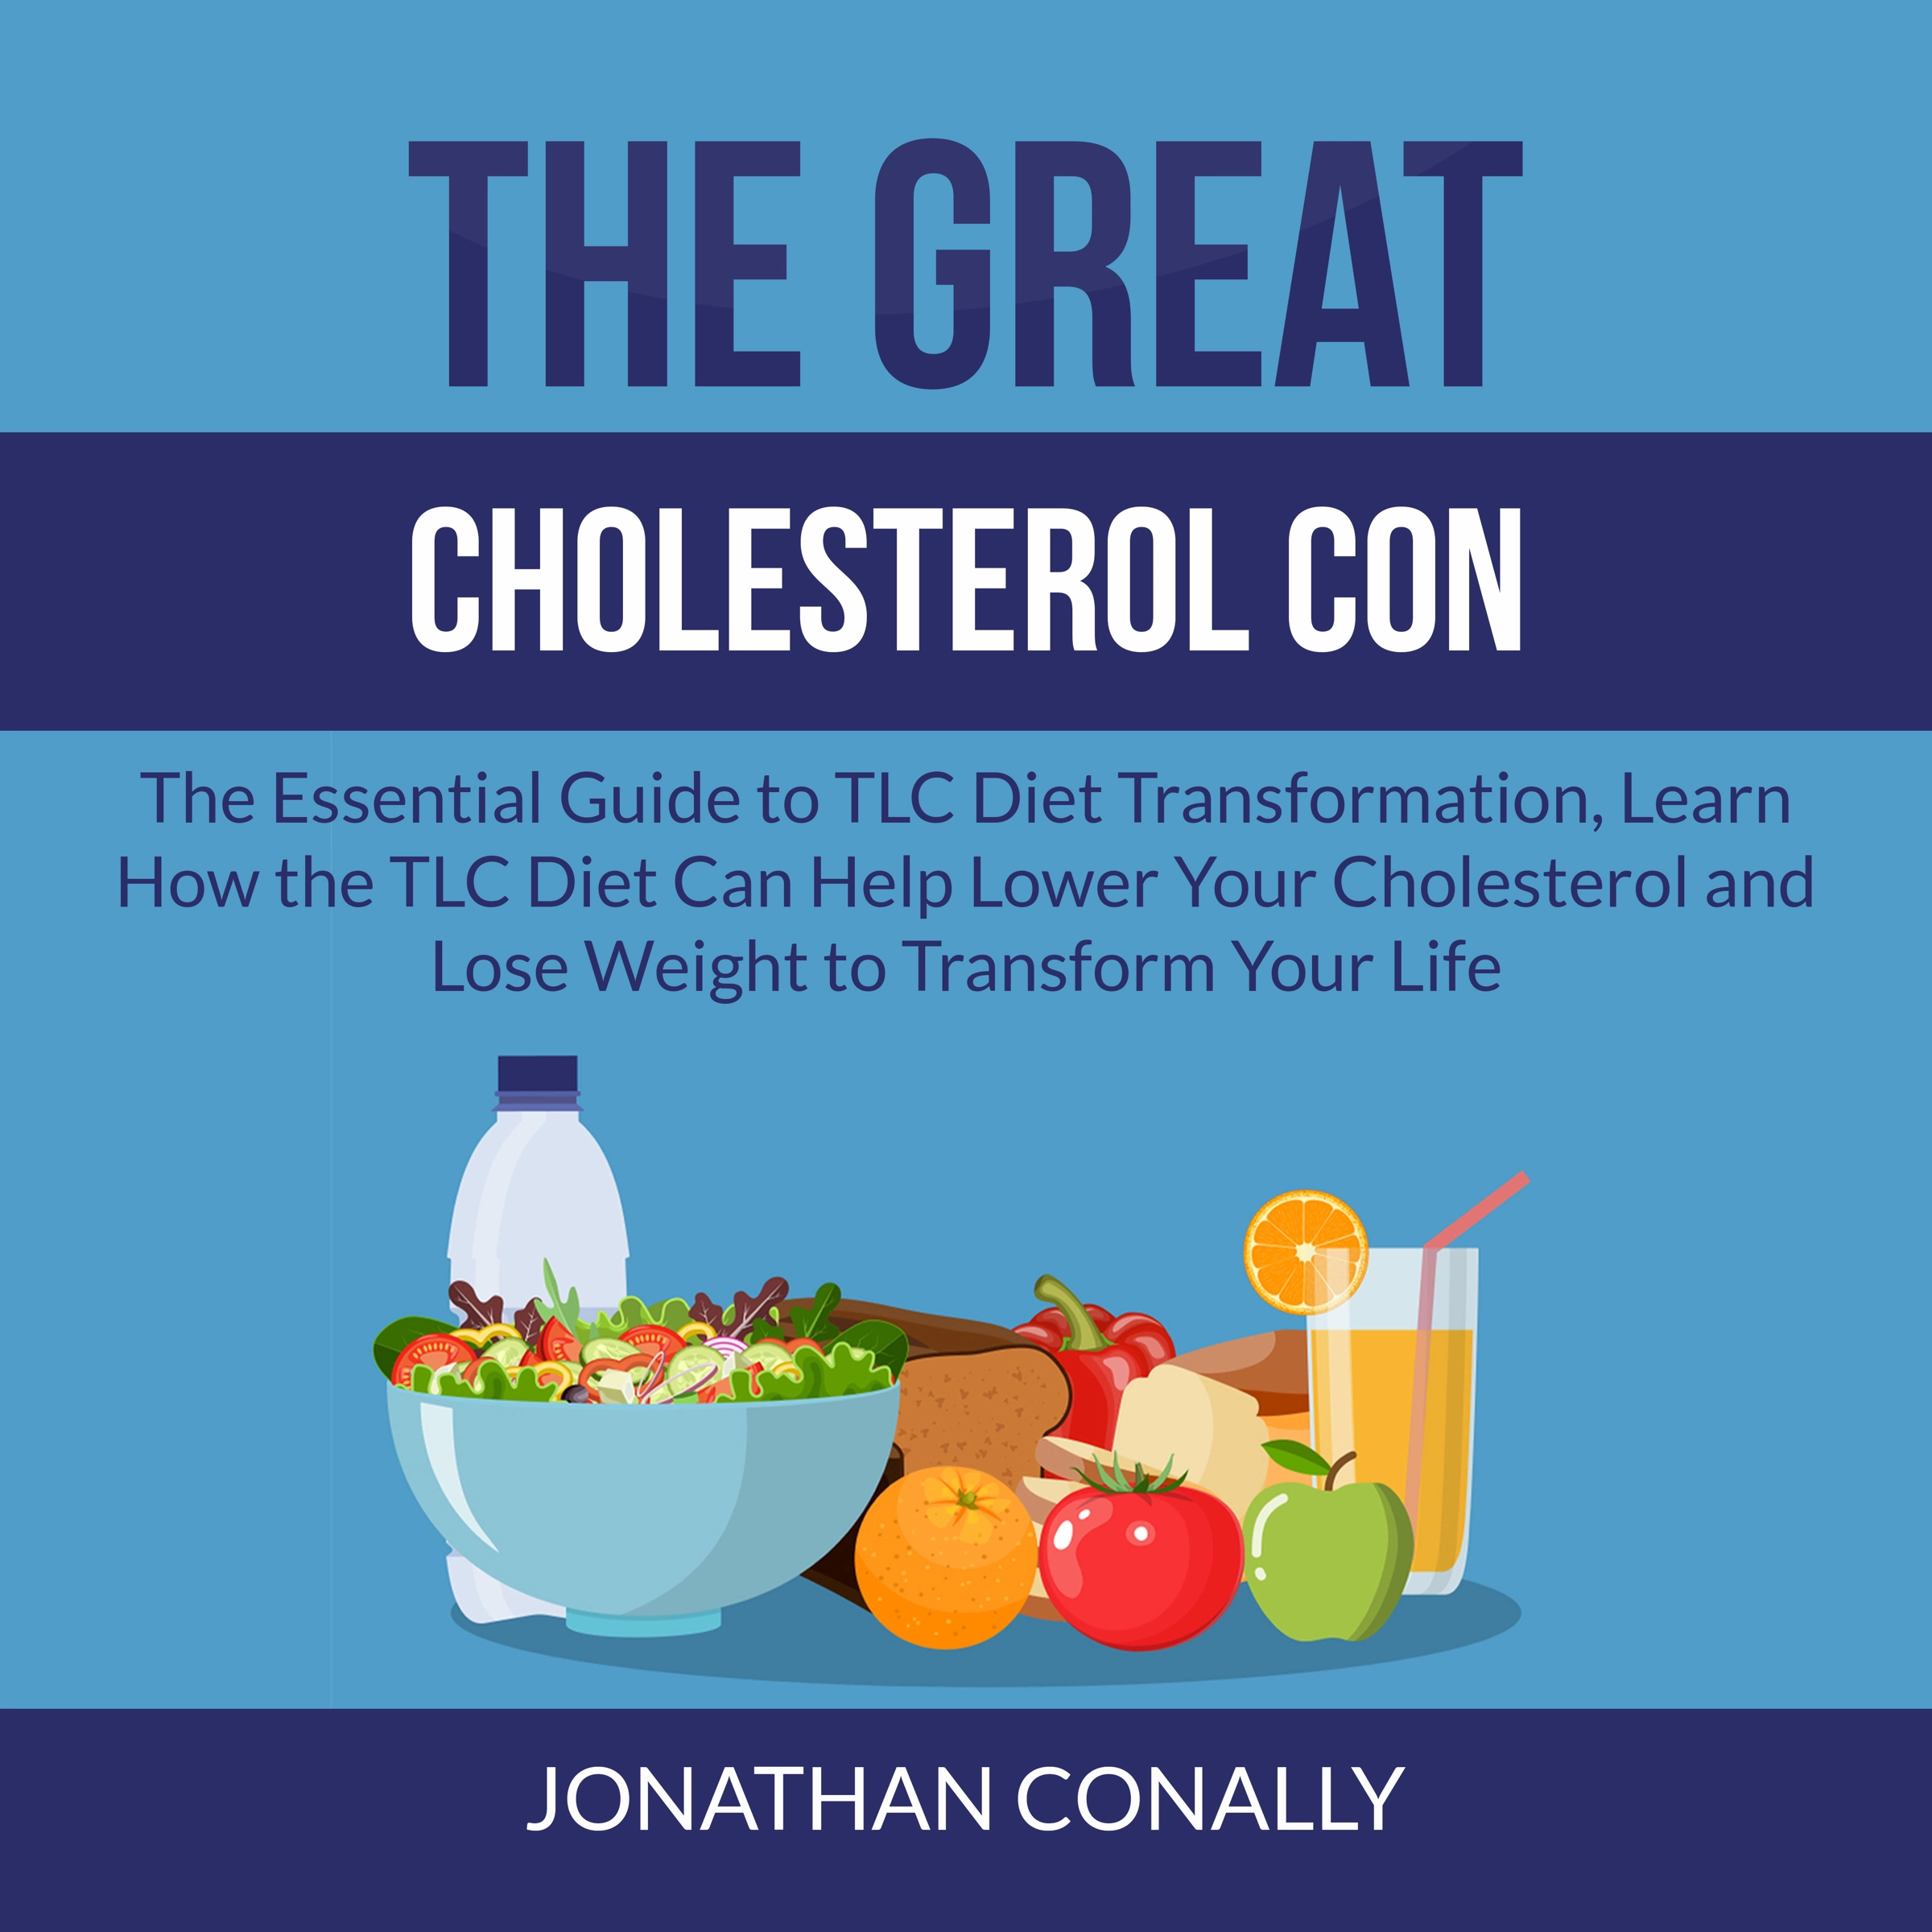 The Great Cholesterol Con Audiobook by Jonathan Conally